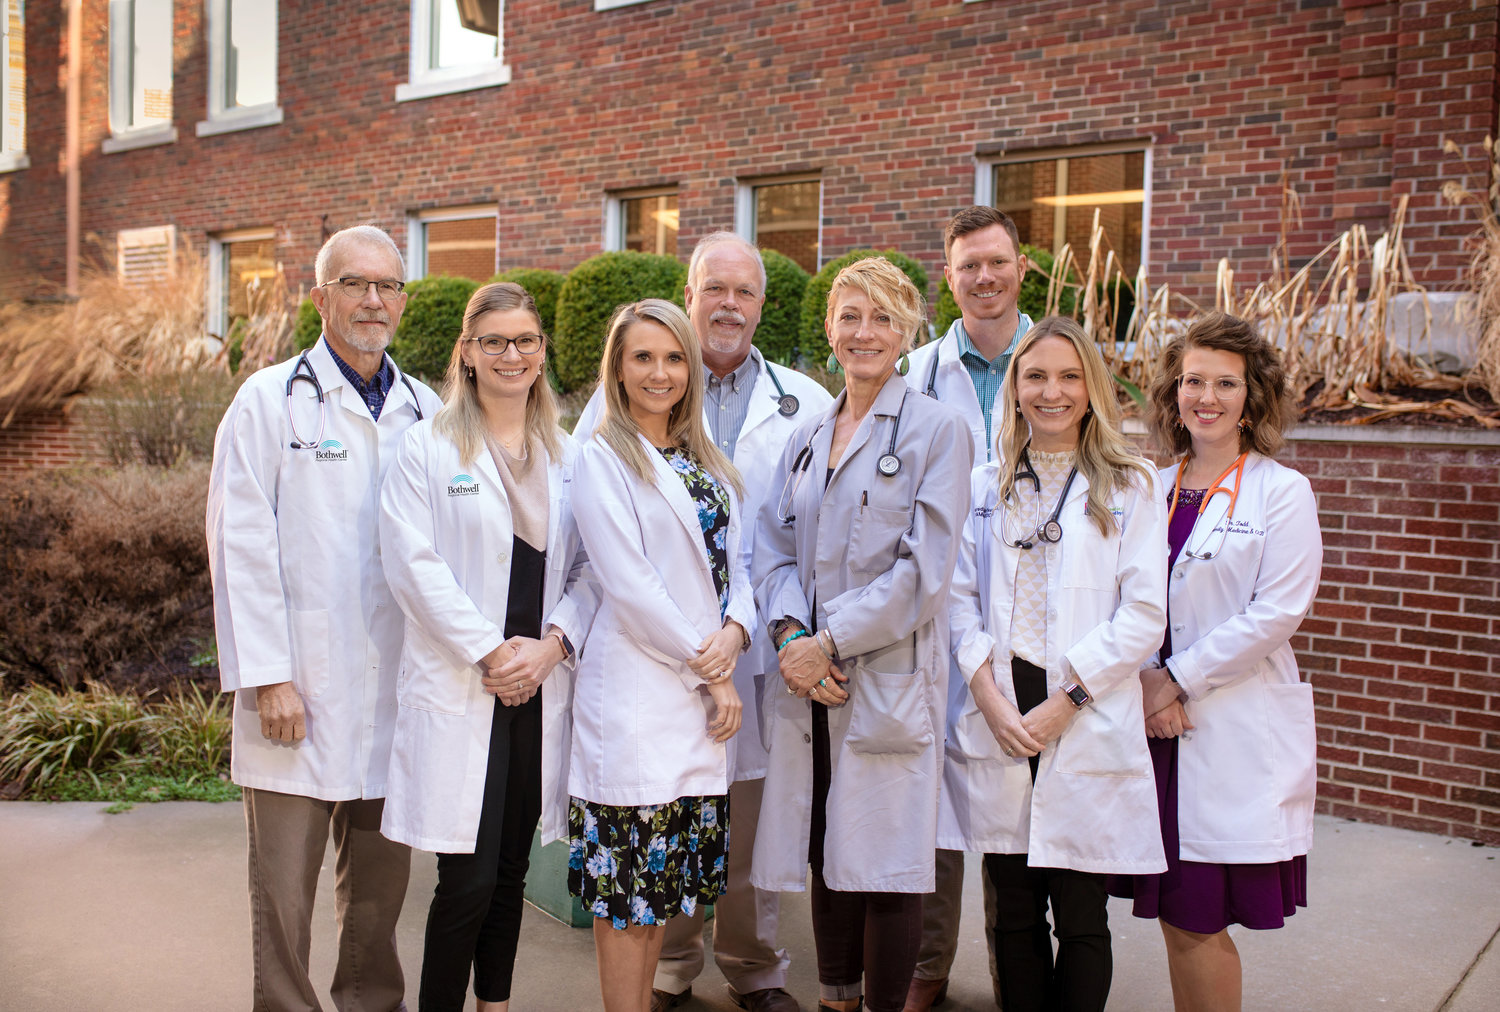 Several Bothwell physicians will serve as faculty for the new Bothwell-University of Missouri Rural Family Medicine Residency. From left, Dr. Robert Frederickson, residency director, Dr. Alyssa Emery, Dr. Lisa Wadowski, Dr. Jeffrey Sharp and Dr. Julie Cahill all with Bothwell Family Medicine Associates; Dr. Matthew Roehrs with Bothwell Lincoln Family Medicine; Dr. Meredith Norfleet with Bothwell Family Medicine Associates; and Dr. Misty Todd, residency associate director, with Bothwell Cole Camp Clinic.